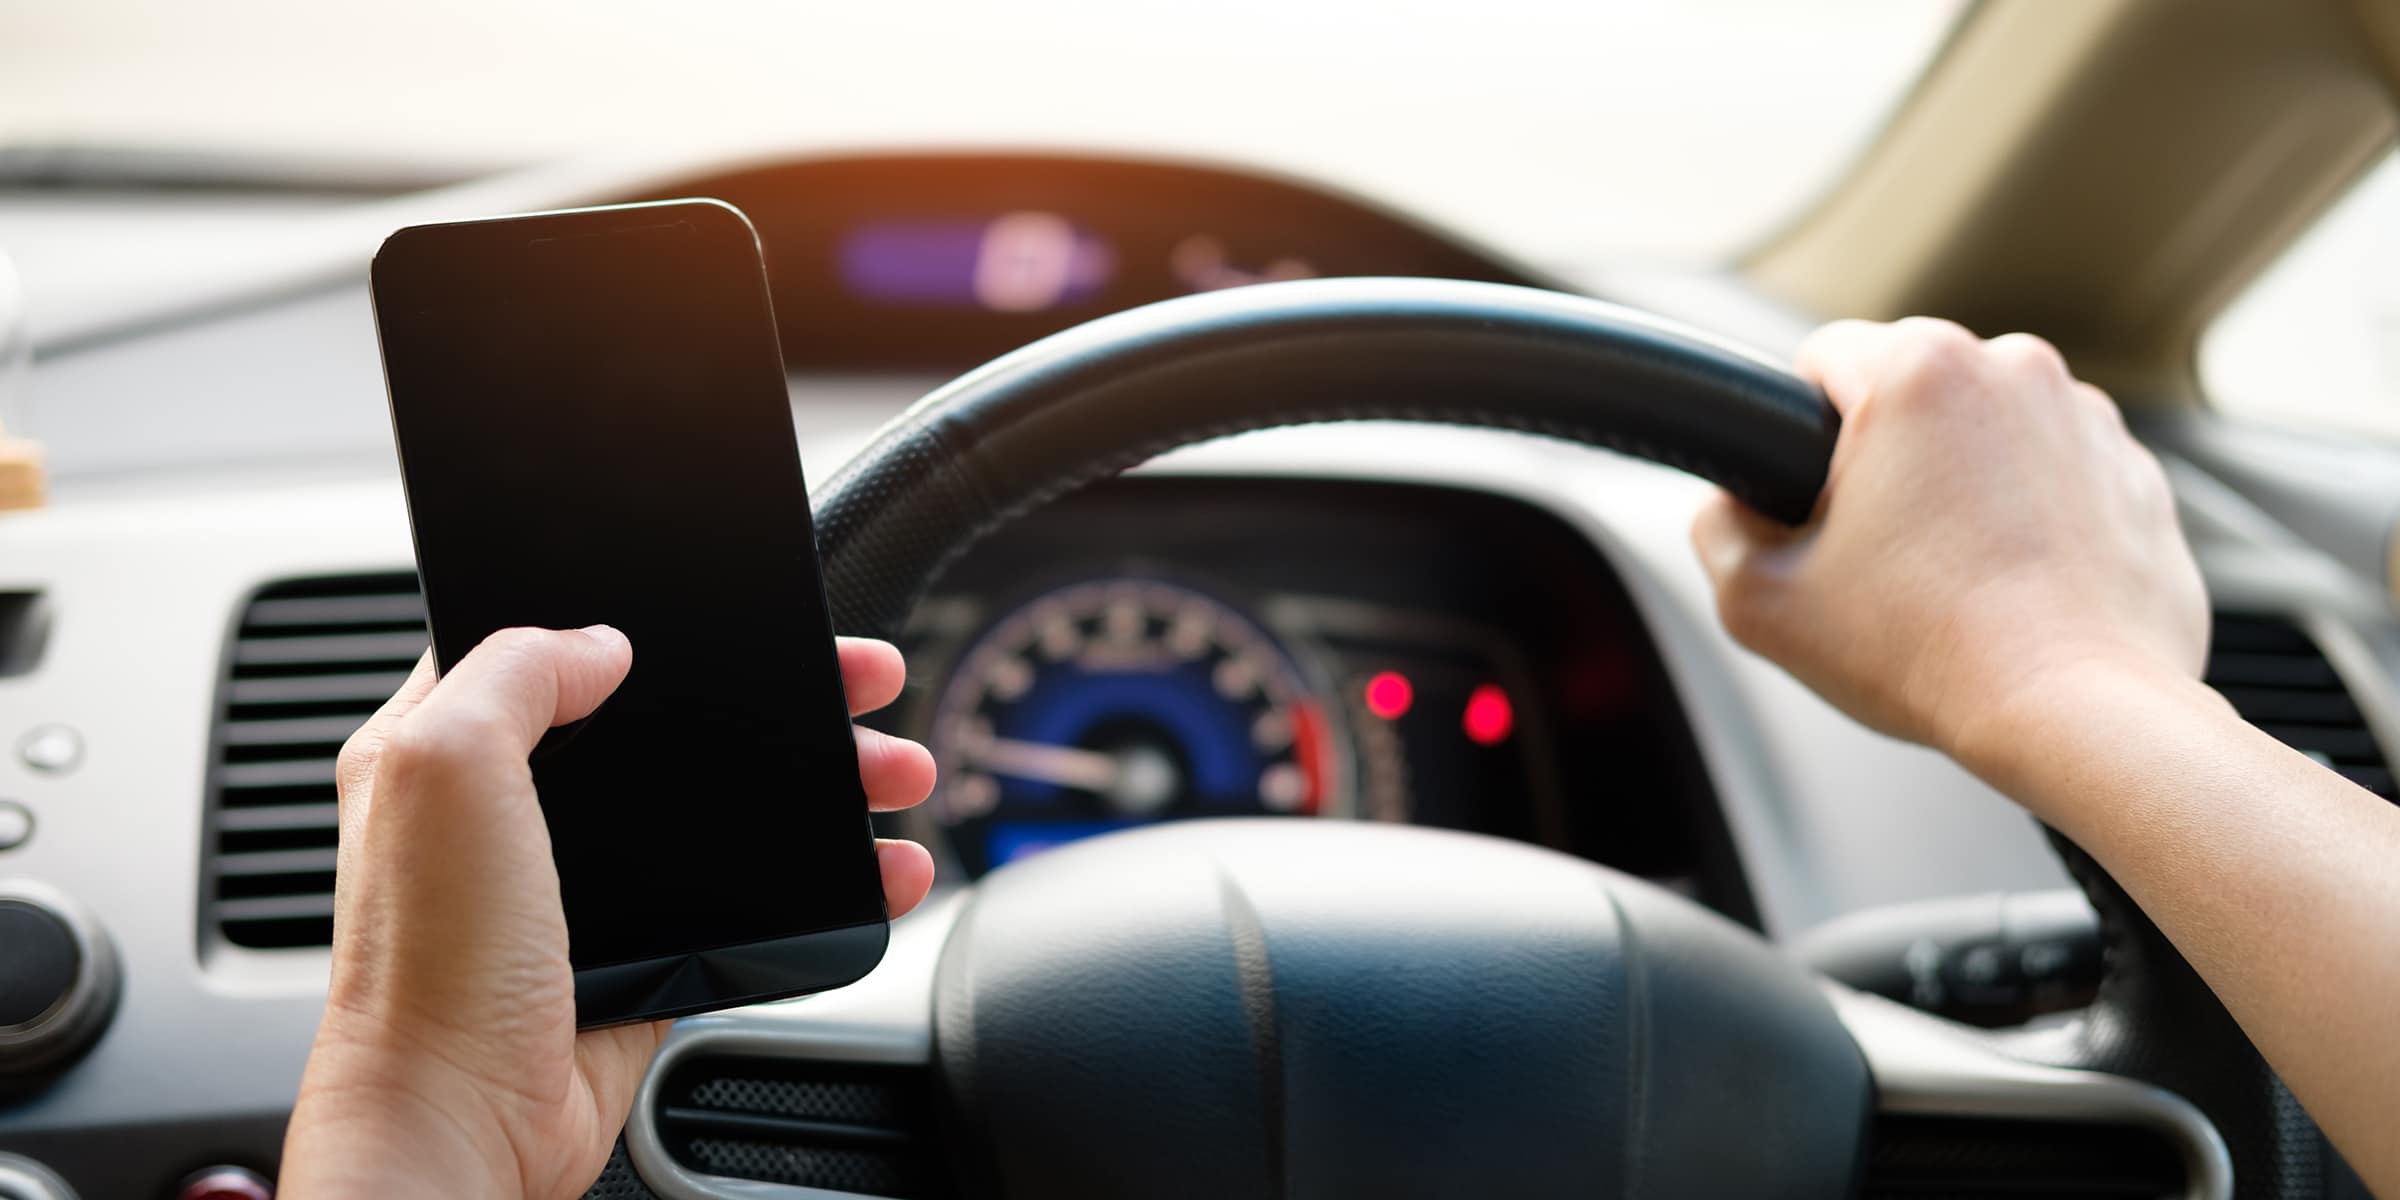 Distracted Driving Roadway Fatalities Hit Record Highs, And The Problem Is Likely Worse That Current Numbers Show